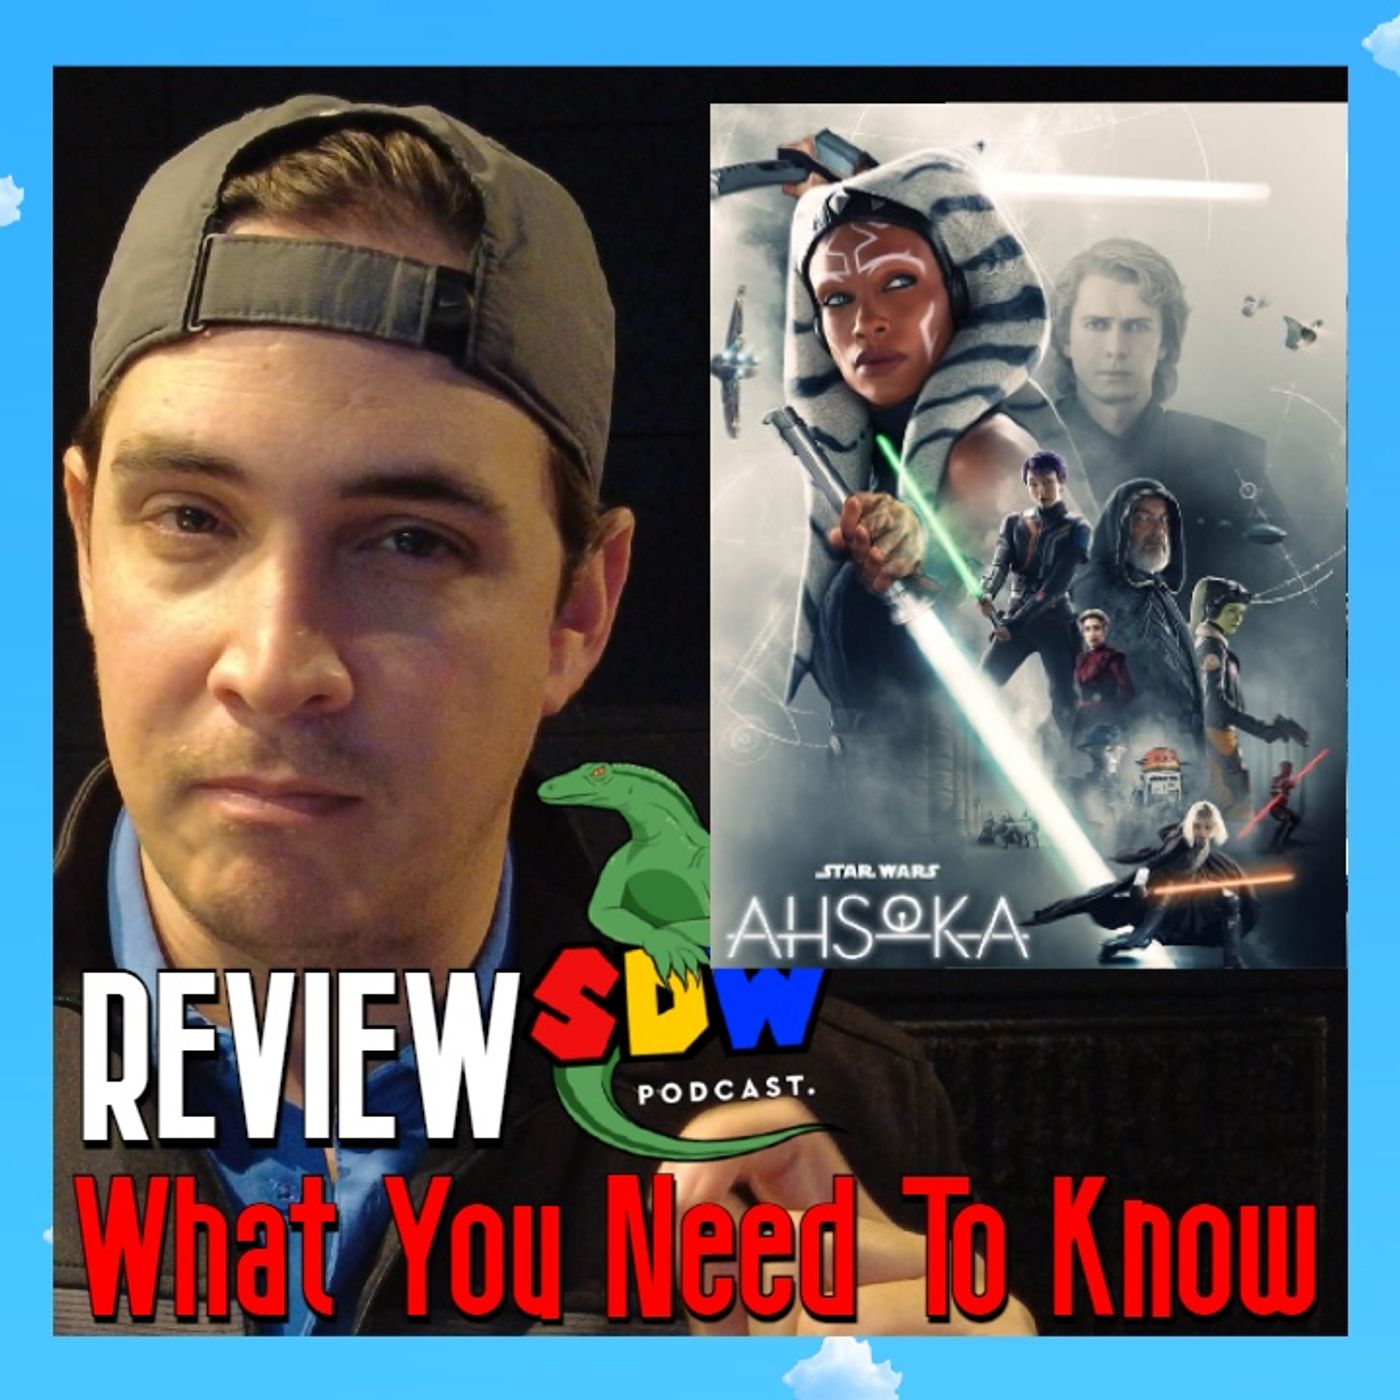 Ahsoka - Review: What You Need To Know To Watch It